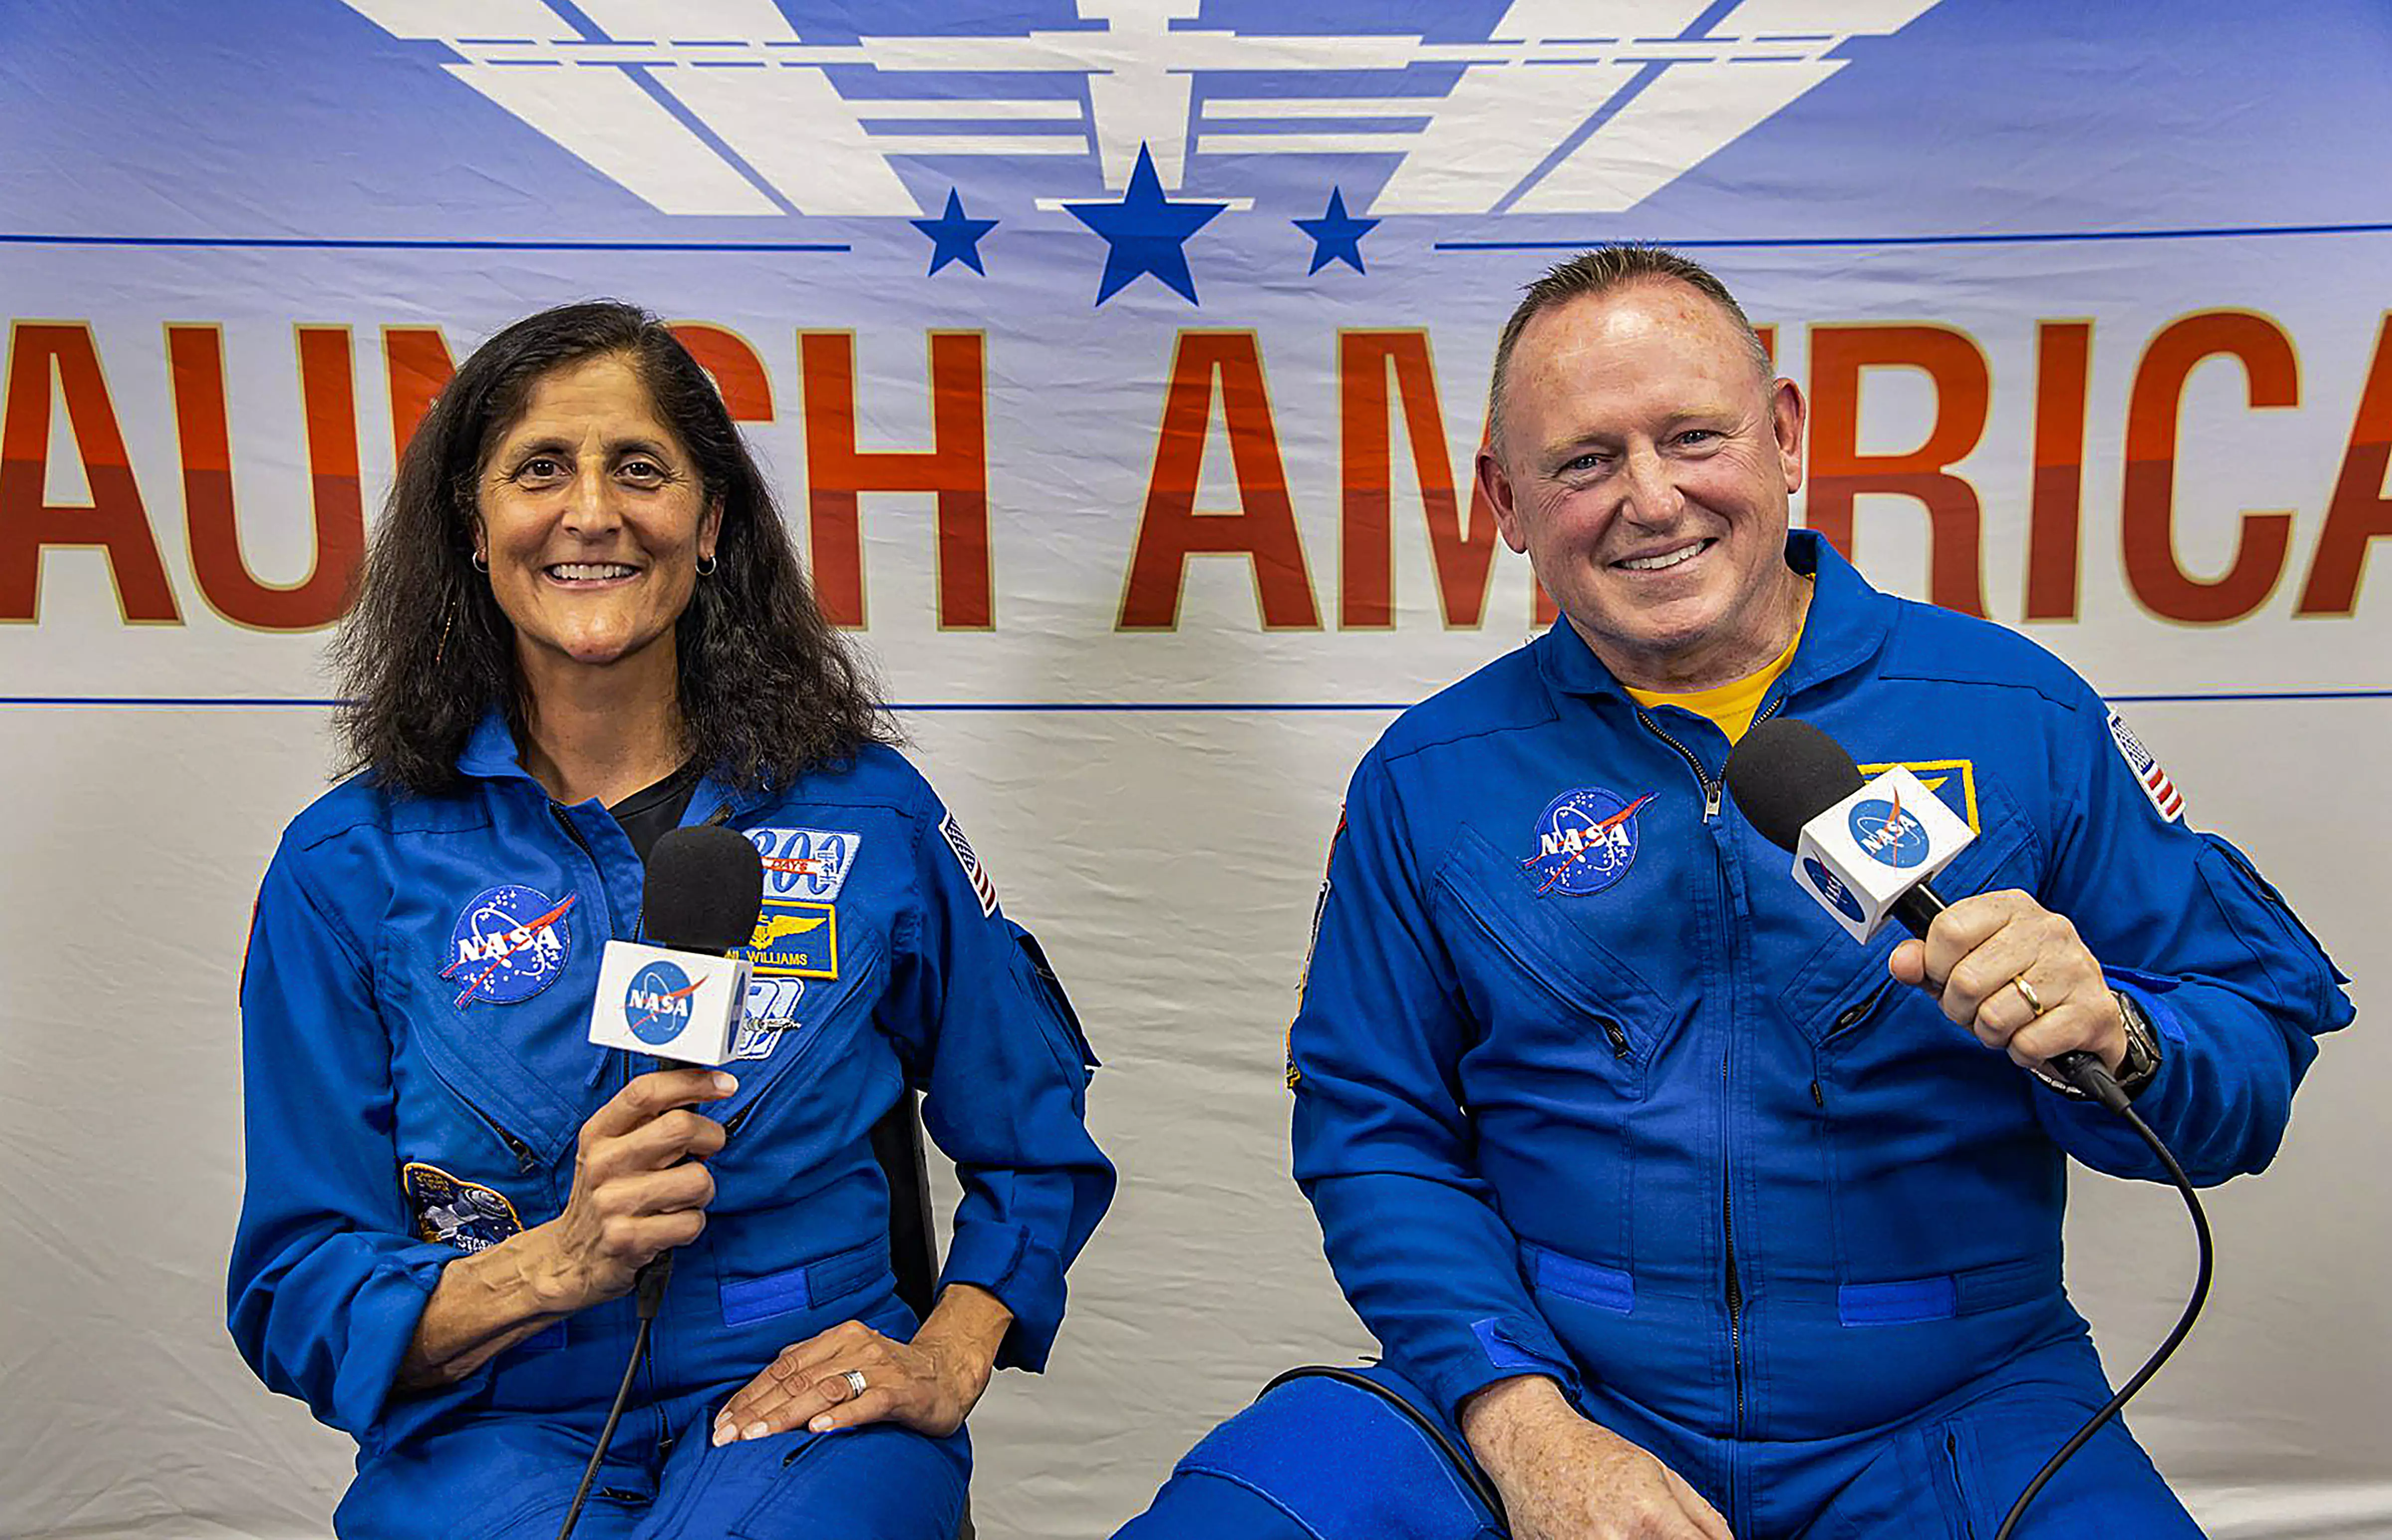 Sunita Williams set to fly into space for third time as Starliner readies flight to ISS